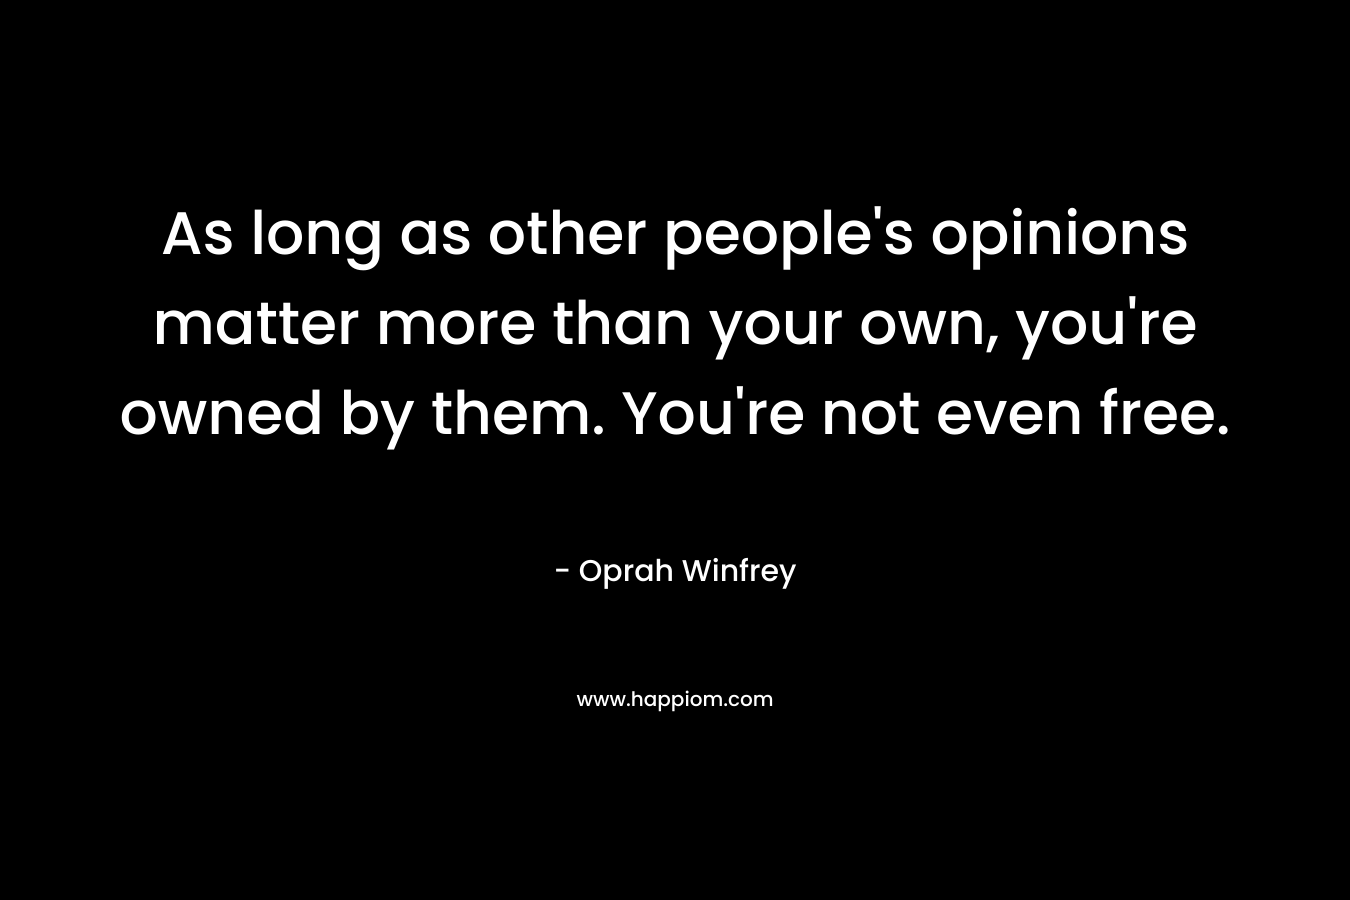 As long as other people's opinions matter more than your own, you're owned by them. You're not even free.